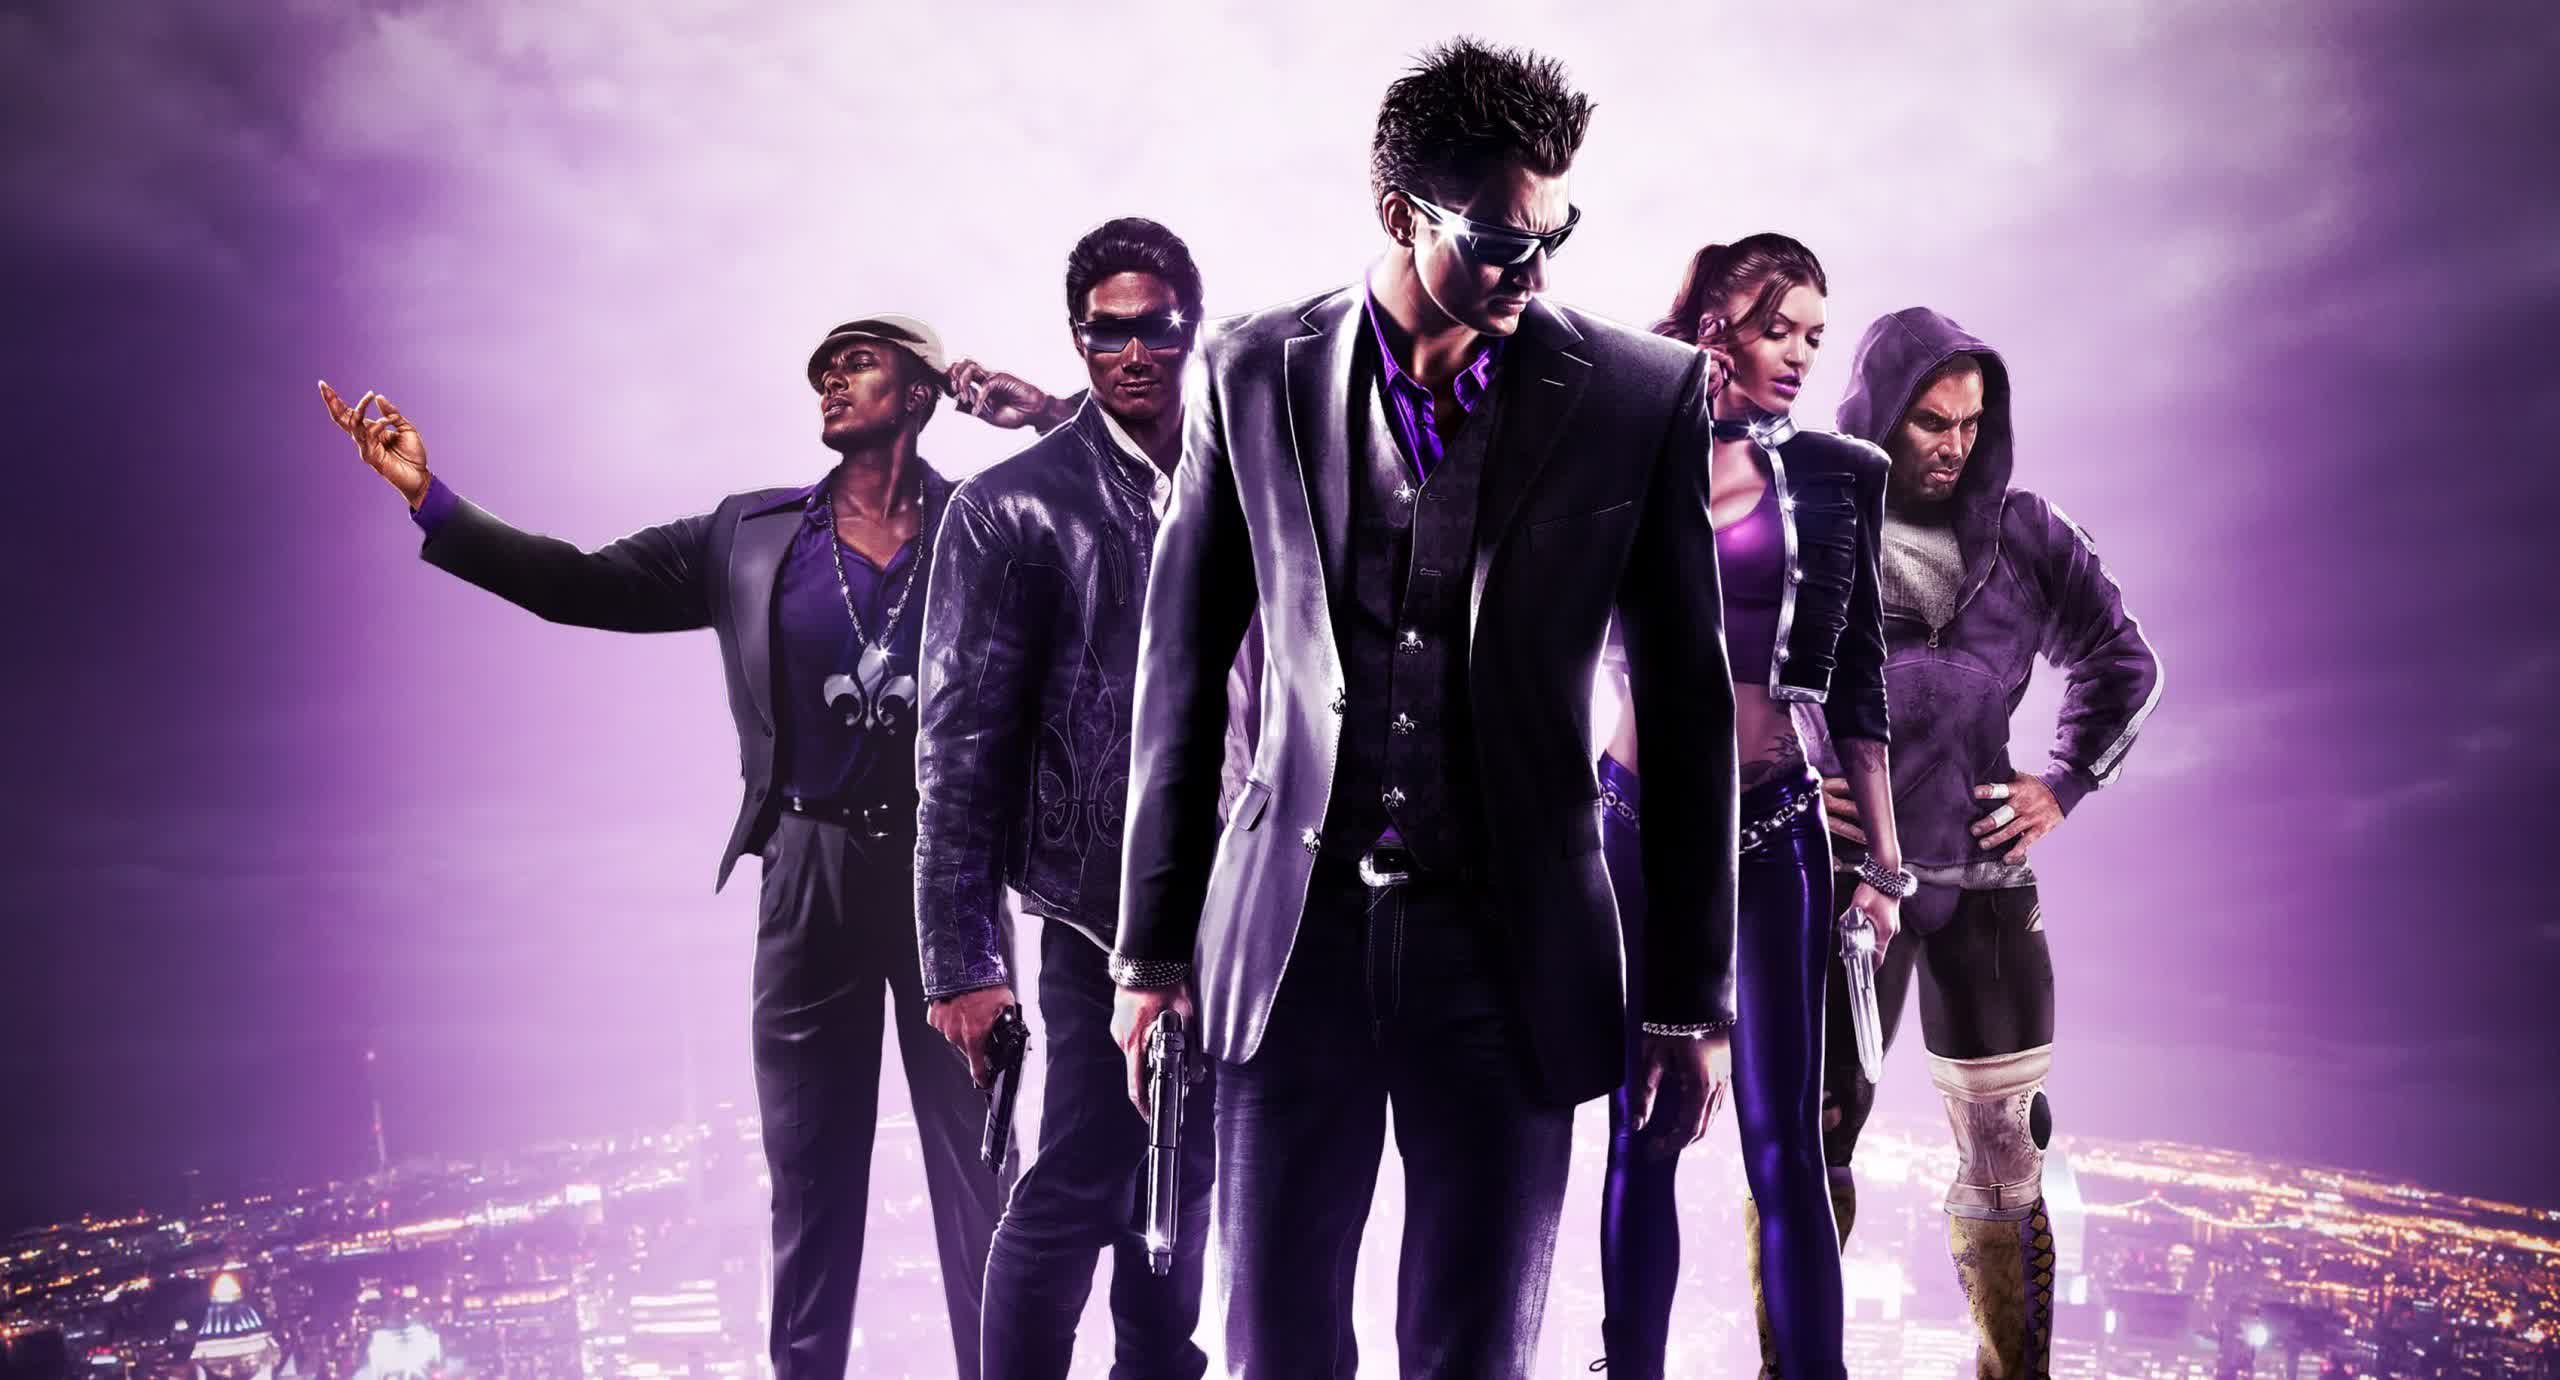 Saints Row developer Volition shuts down after 30 years thanks to a $2 billion deal gone south